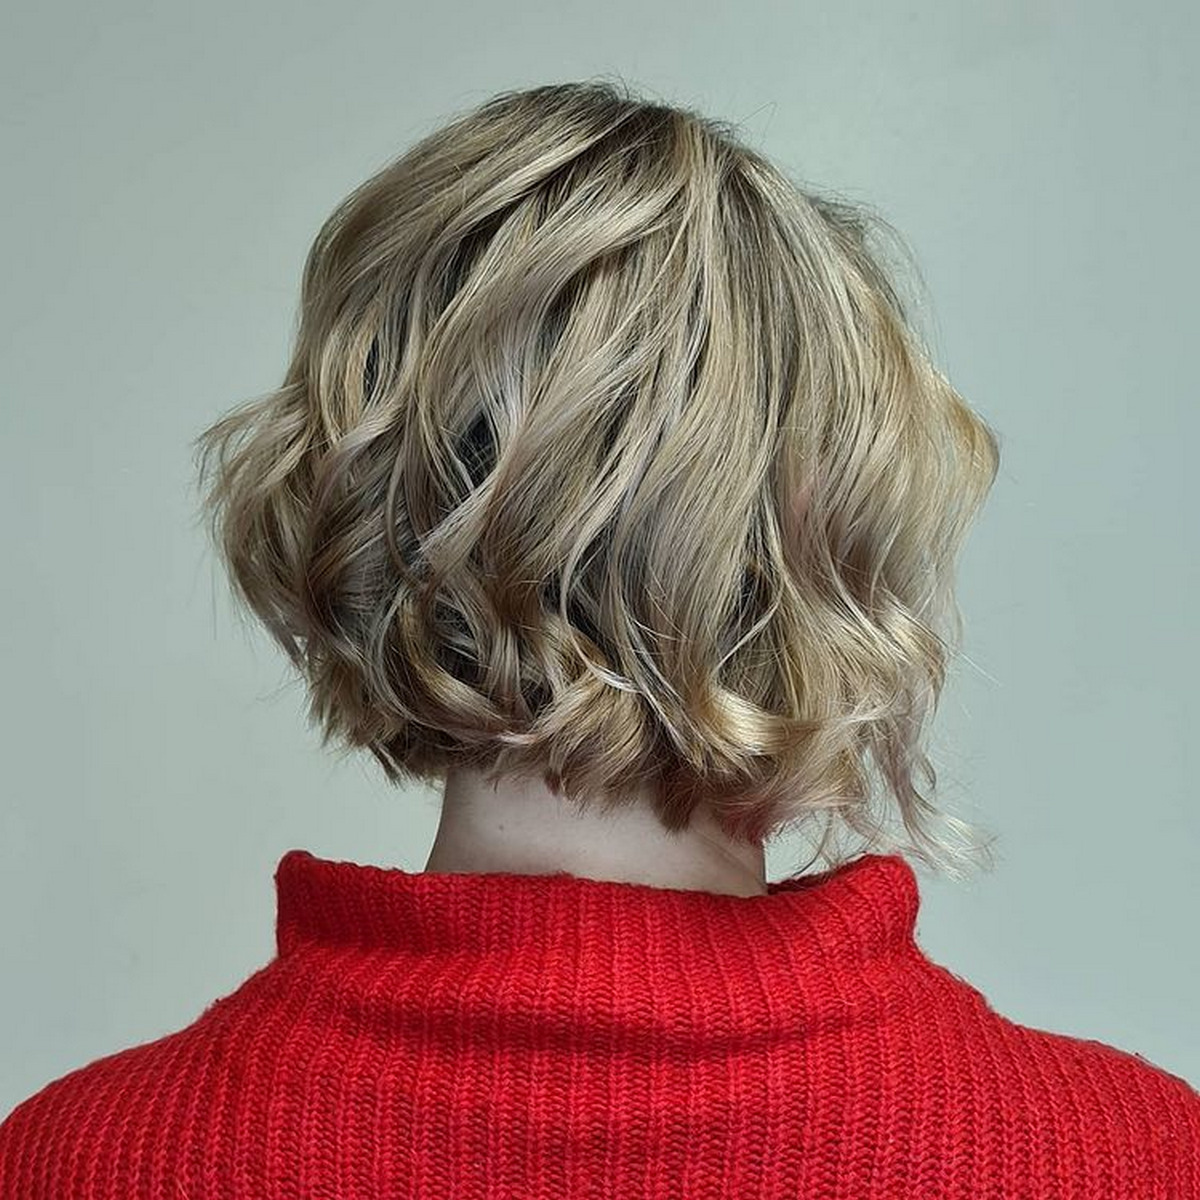 23 Naturally Curly Bob Haircut and Hairstyle Ideas to Try in 2022